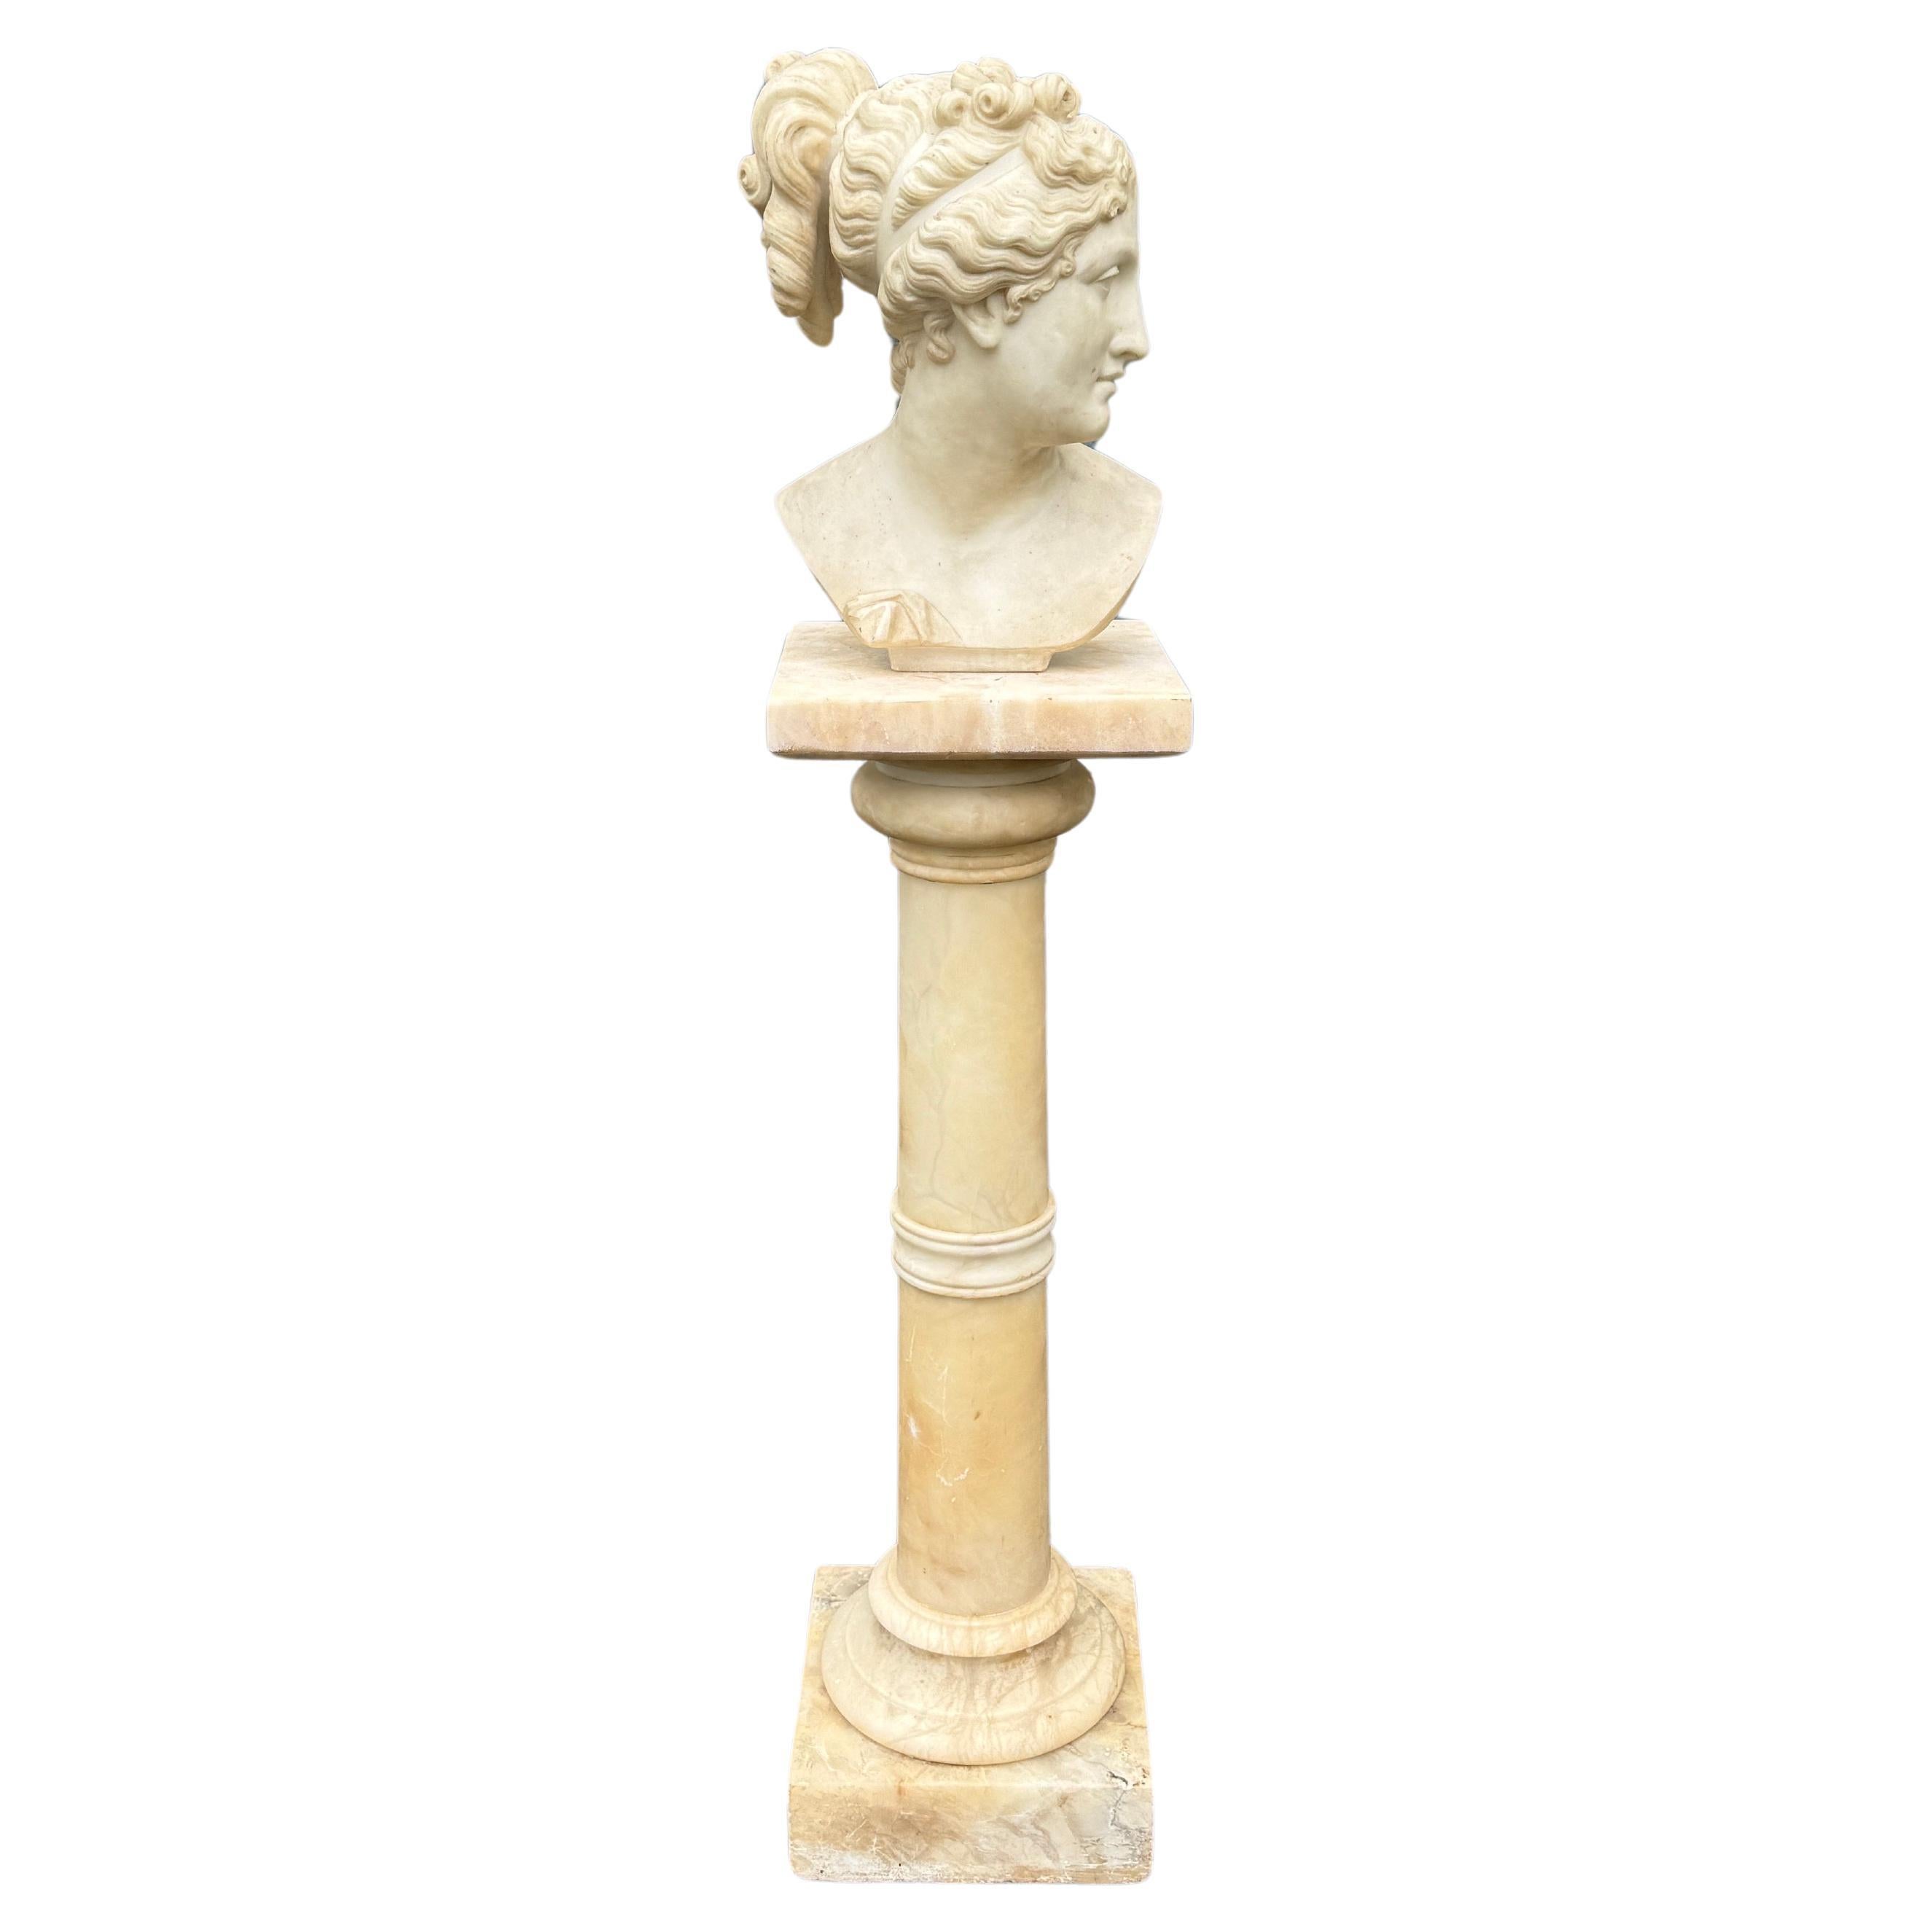 An exquisite marble bust from the 19th Century portraying a female figure.  A true testament to the craftsmanship of the Classical Roman era, this piece stands atop a 3 piece white marble pedestal base, making it a stunning focal point for any